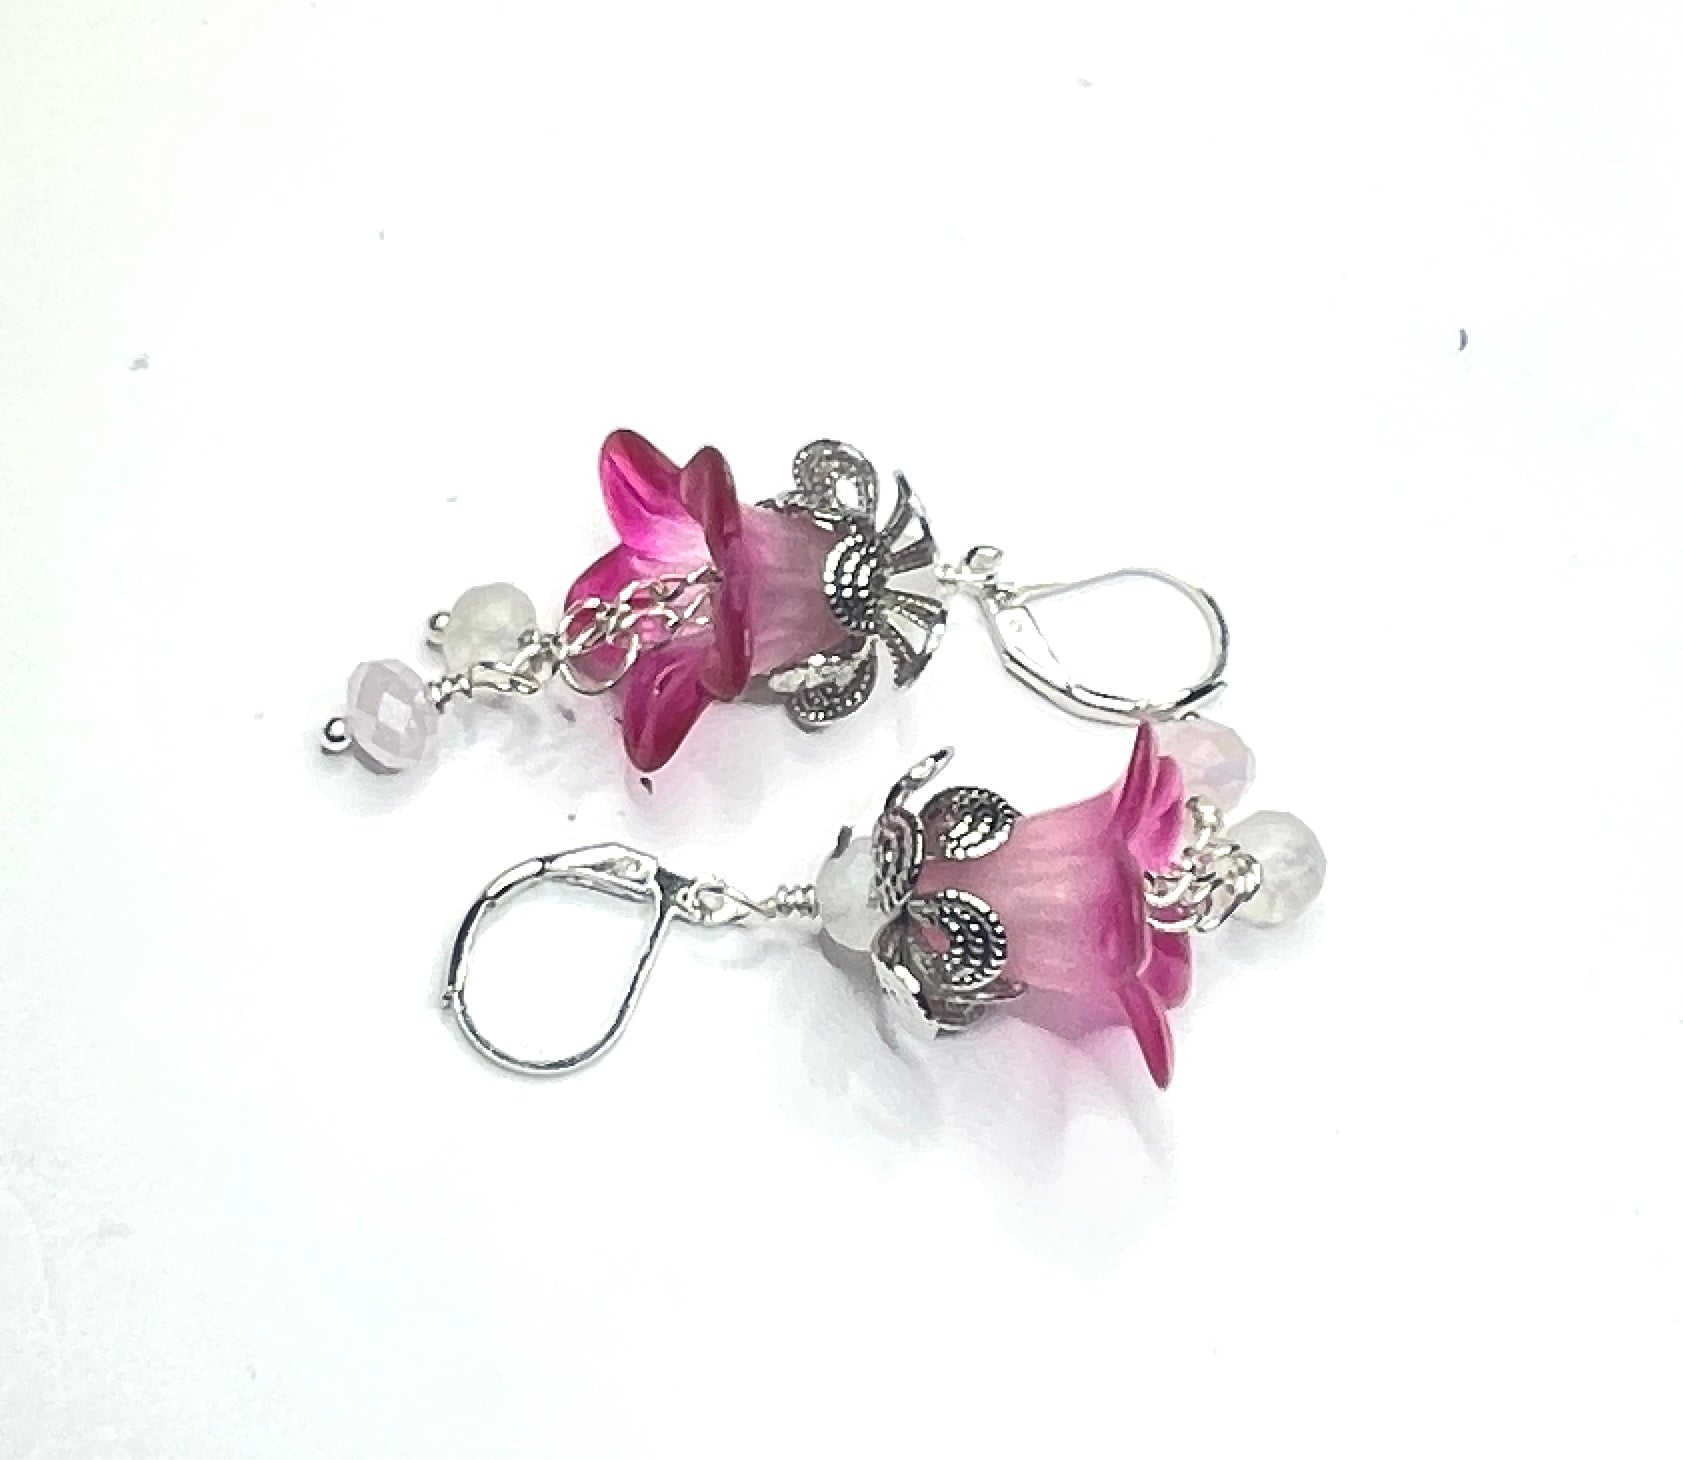 Beads and flower earrings - urban junky's collections of jewellery